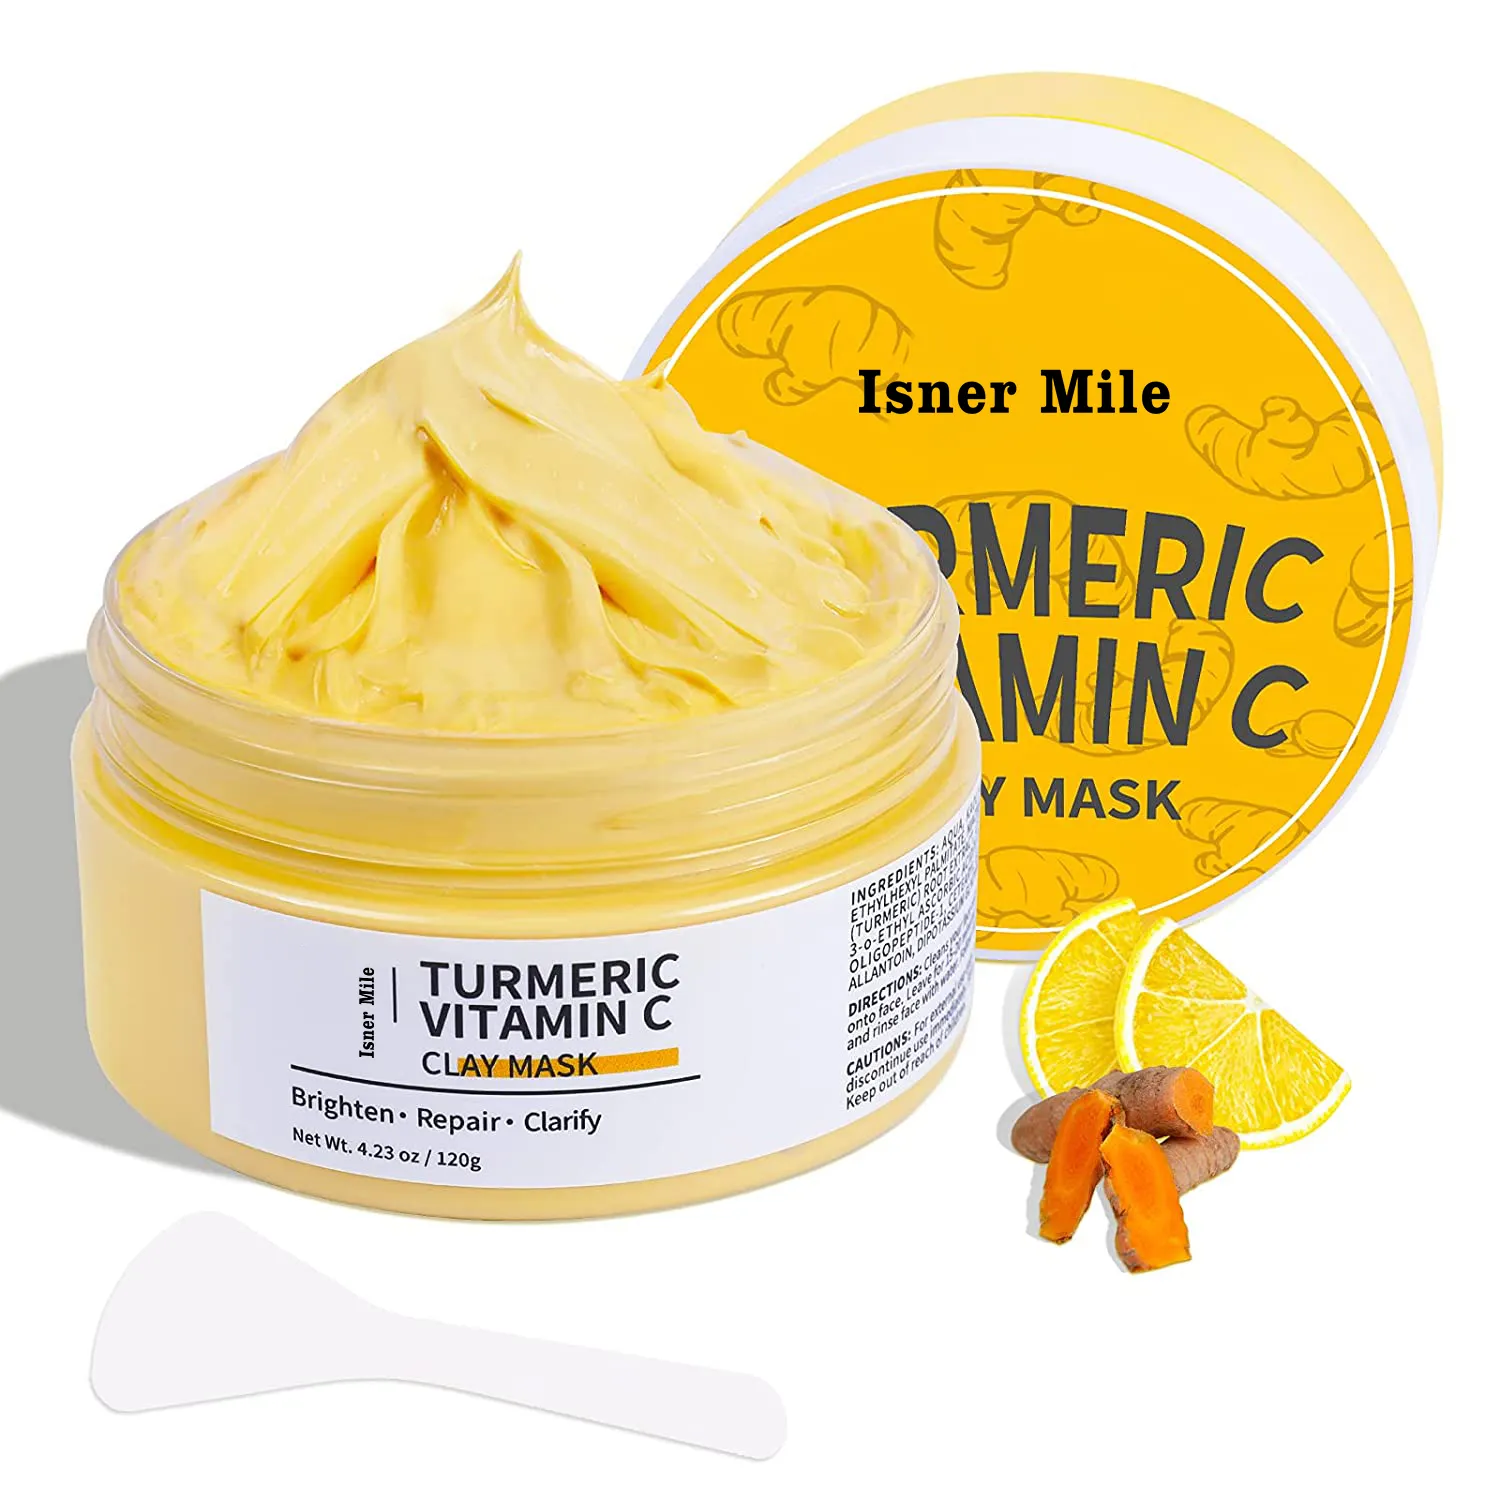 Acne Dark Spots Turmeric Clay Mask Vitamin C Mud Facial Mask for Blackheads Wrinkles Hydrating Cleansing